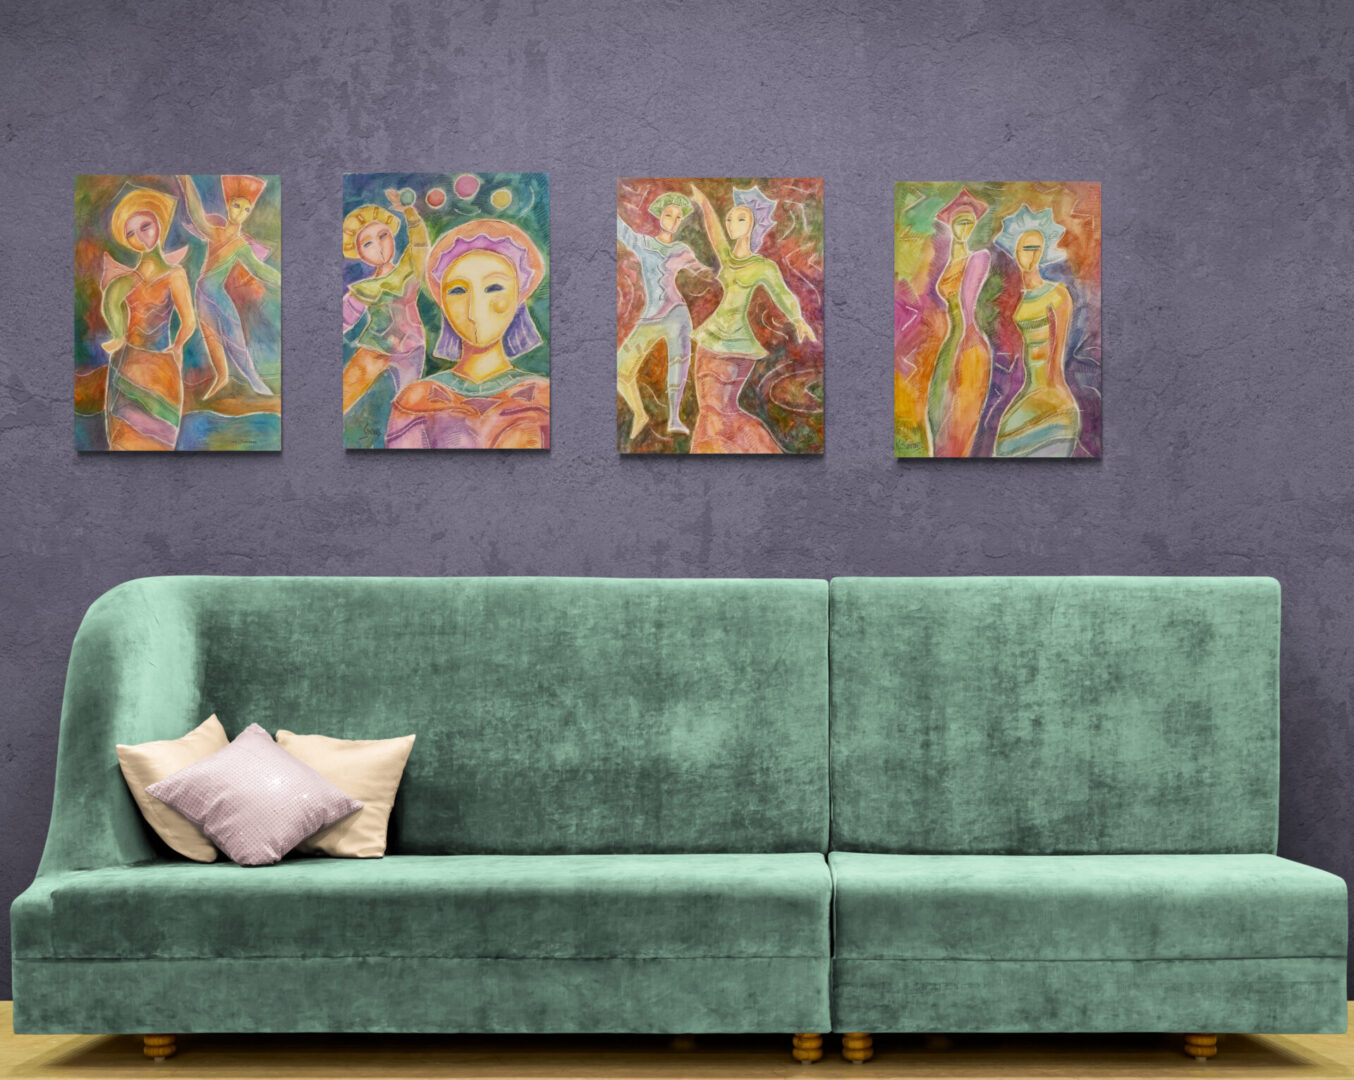 Local Fine Art For Sale: Four paintings on a wall in front of a green couch.